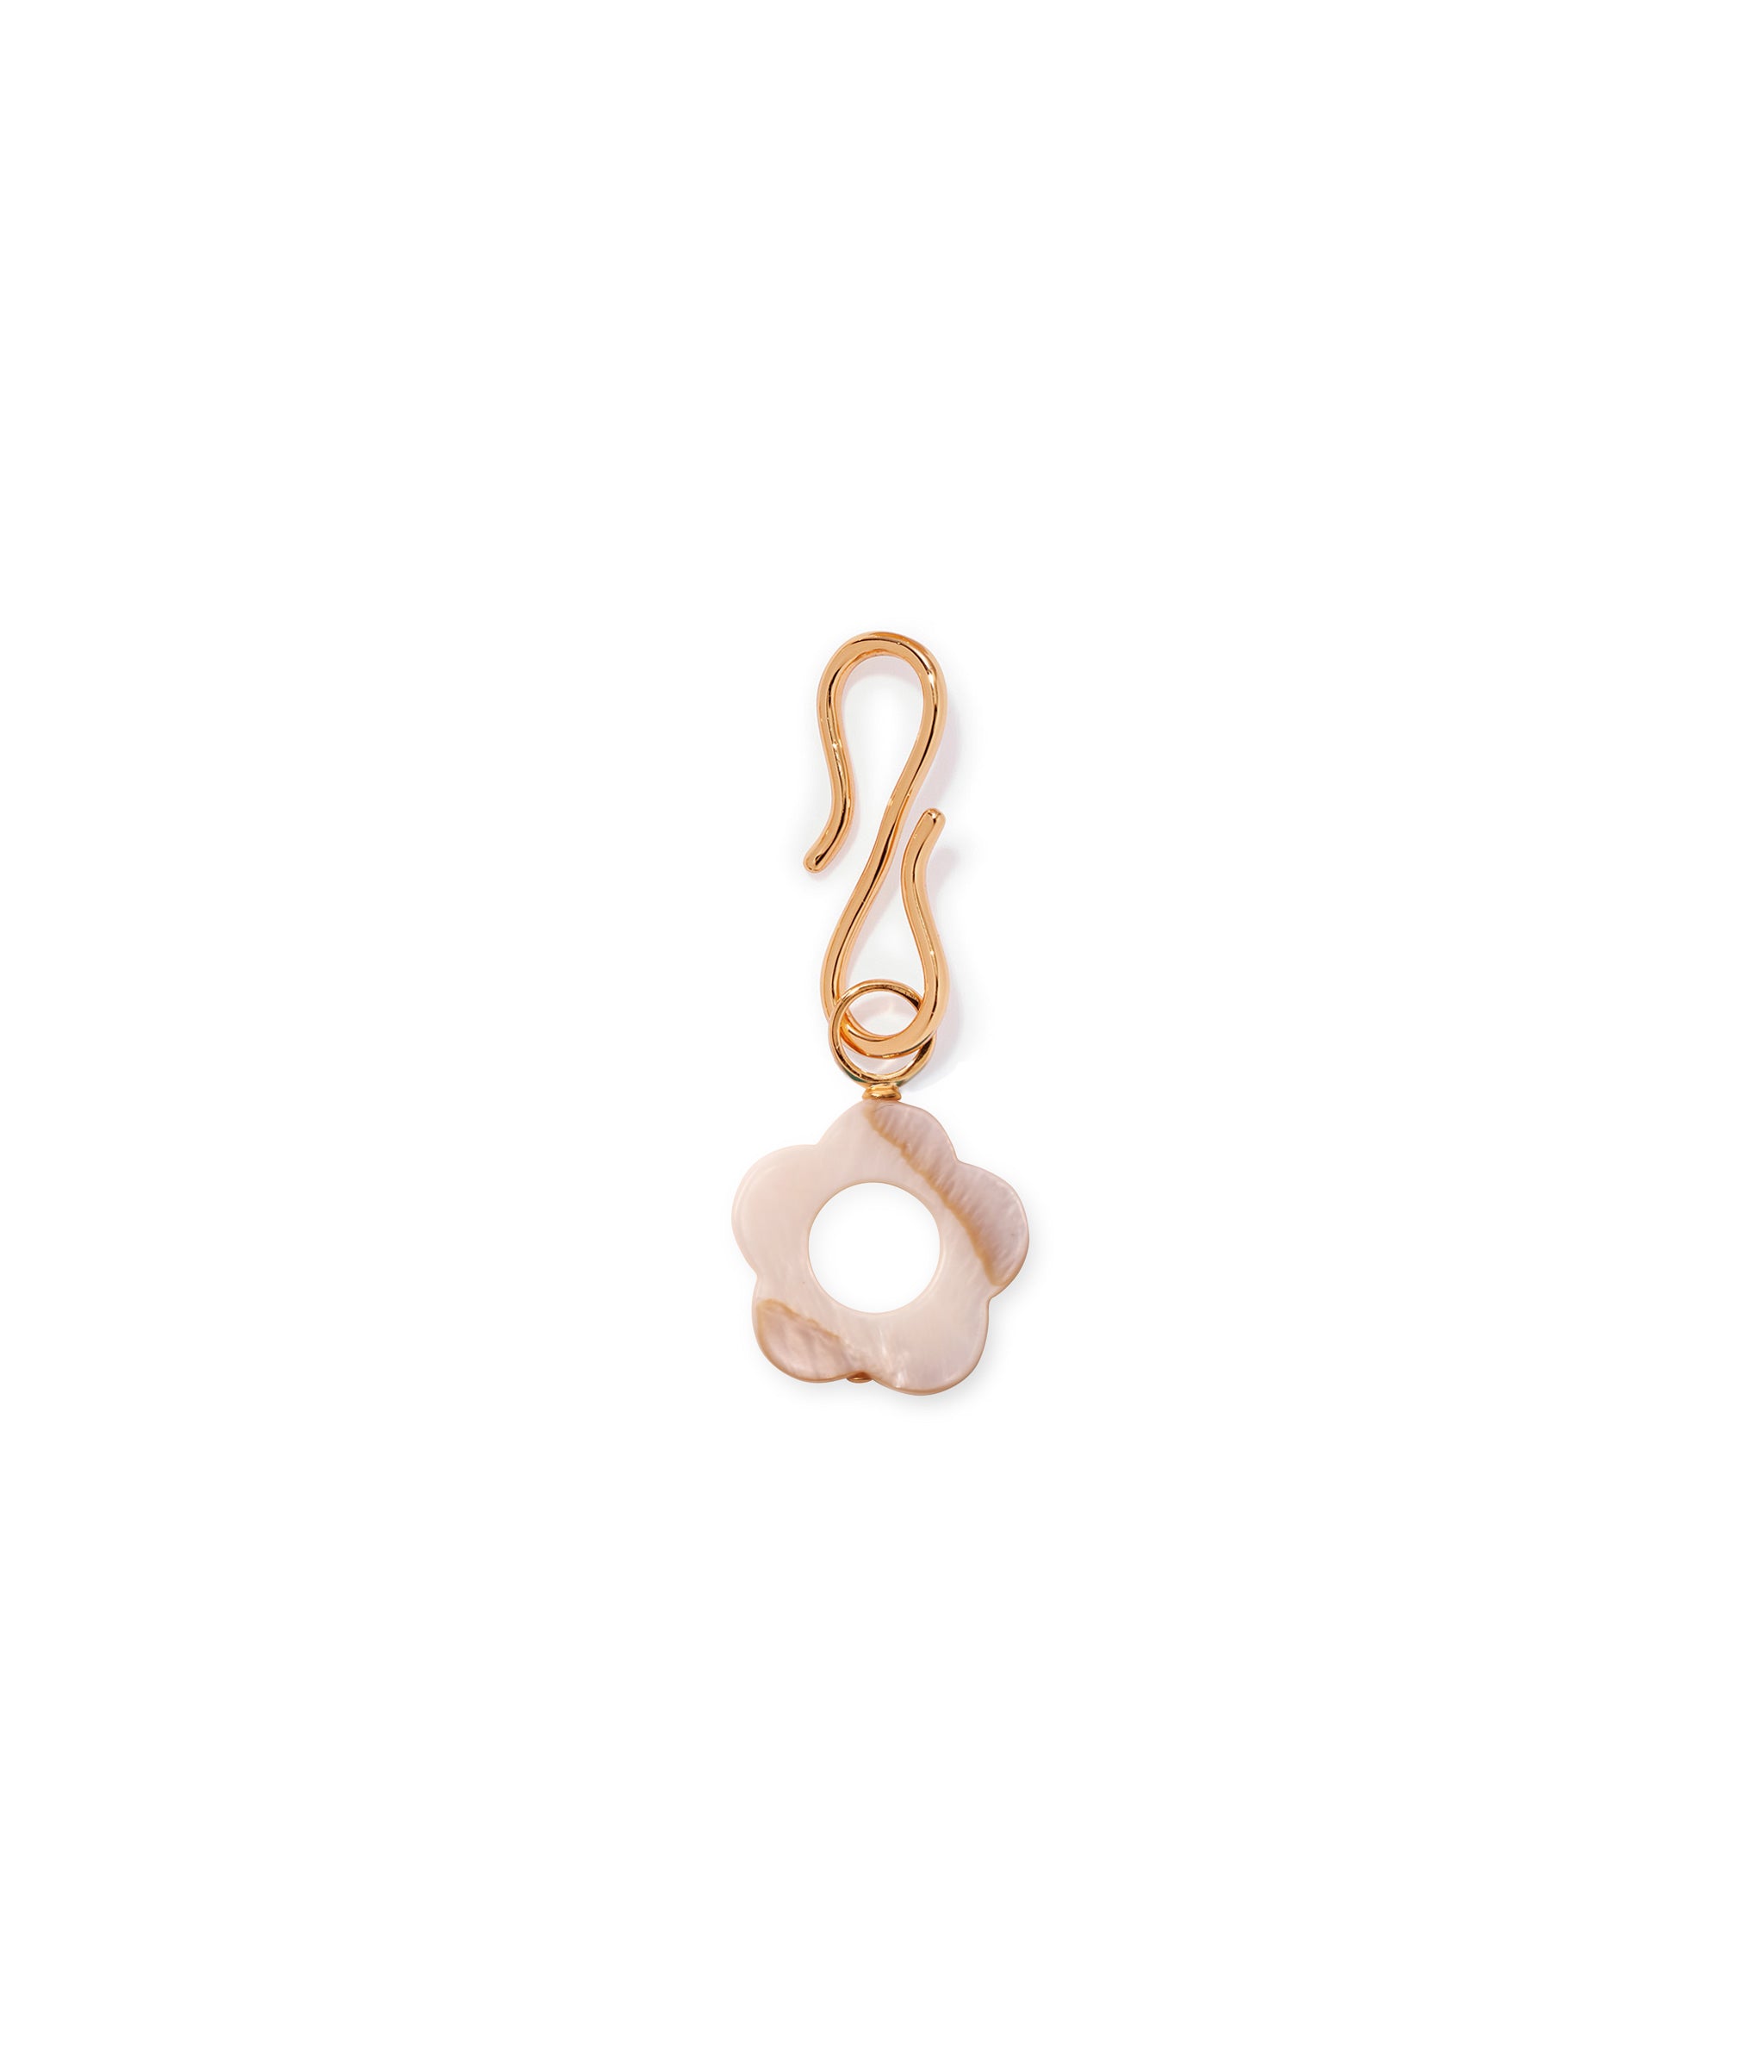 Petal Pusher Charm. Gold-plated s-hook with carved mother-of-pearl flower charm.